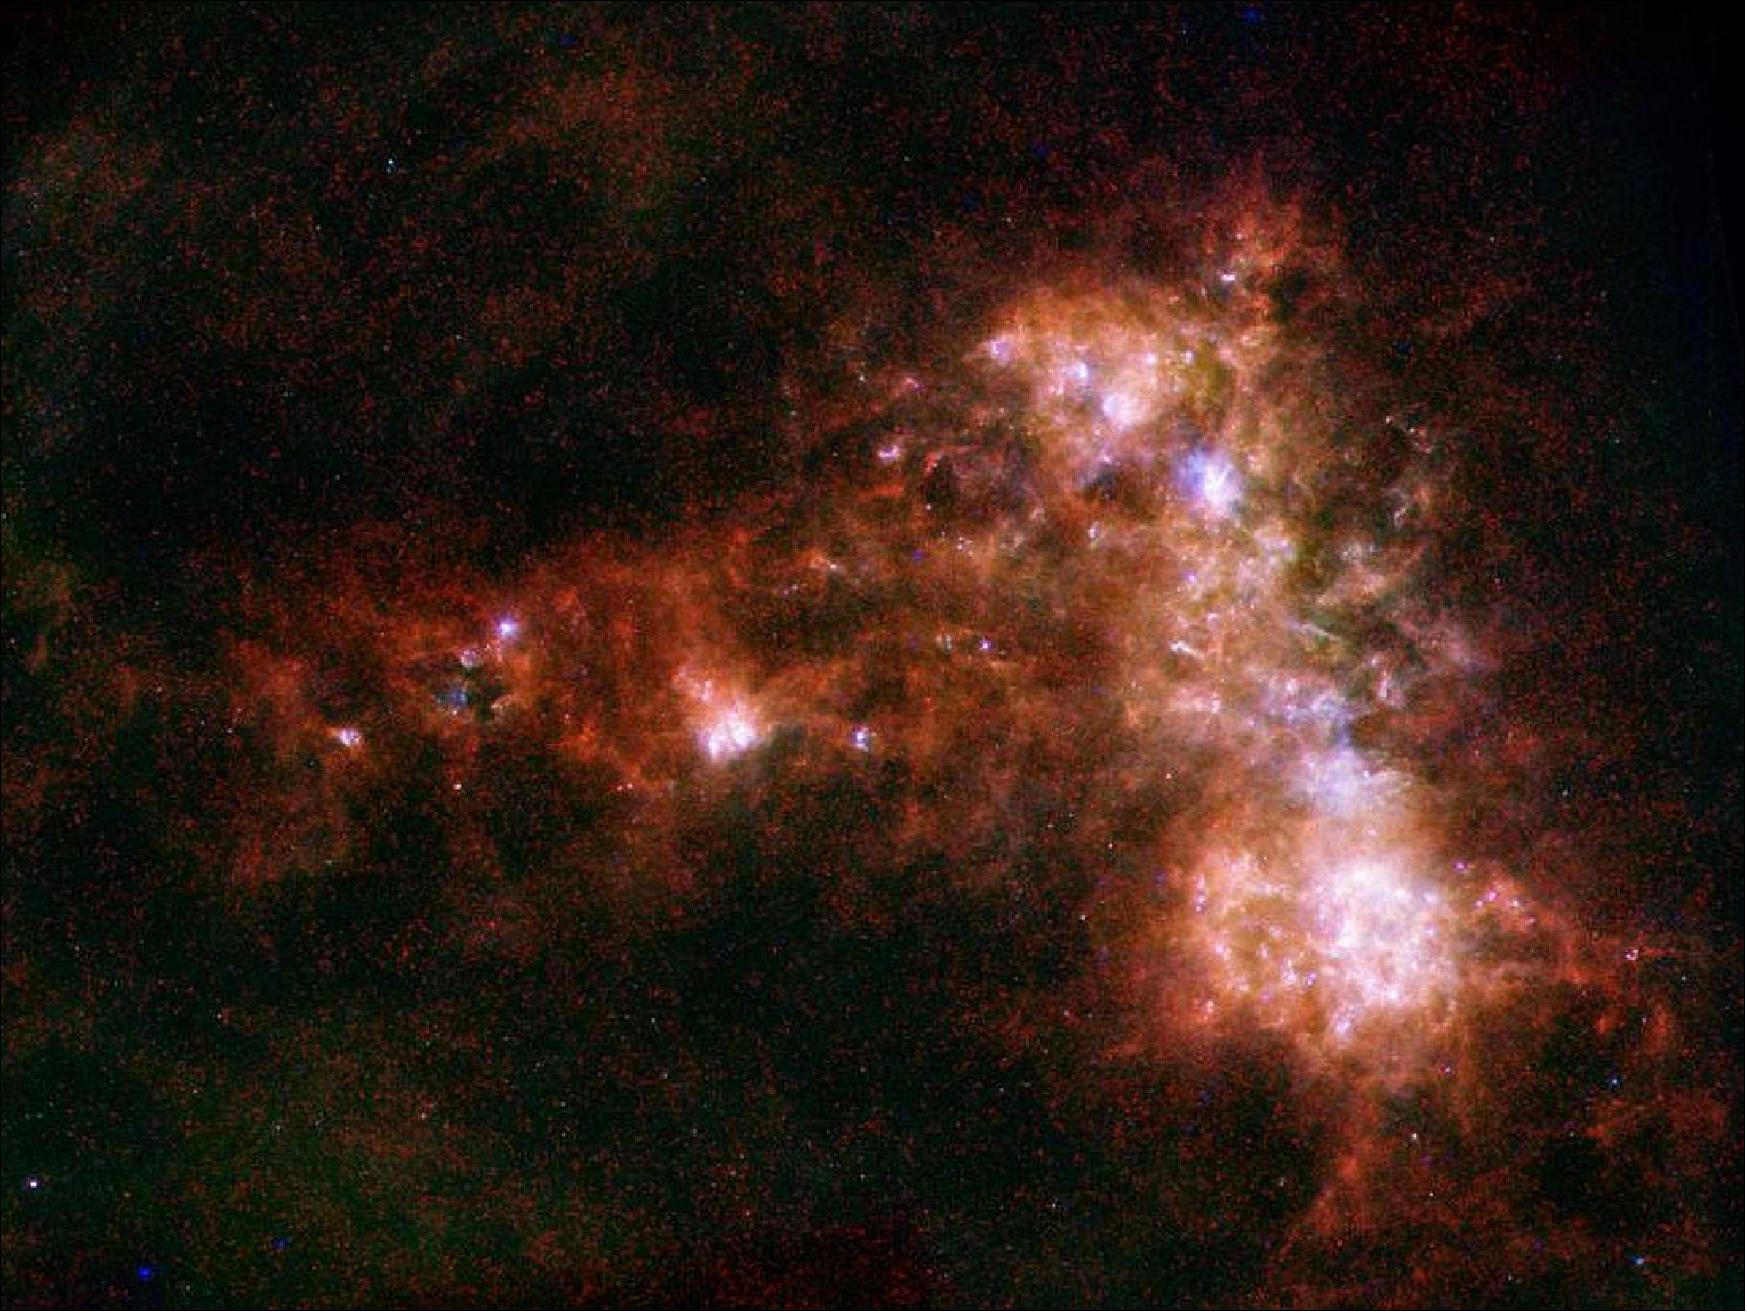 Figure 53: In combined data from Herschel and Spitzer, the irregular distribution of dust in the Small Magellanic Cloud becomes clear. A stream of dust extends to the left in this image, known as the galaxy's "wing," and a bar of star formation appears on the right (image credit: ESA, NASA/JPL-Caltech, STScI)